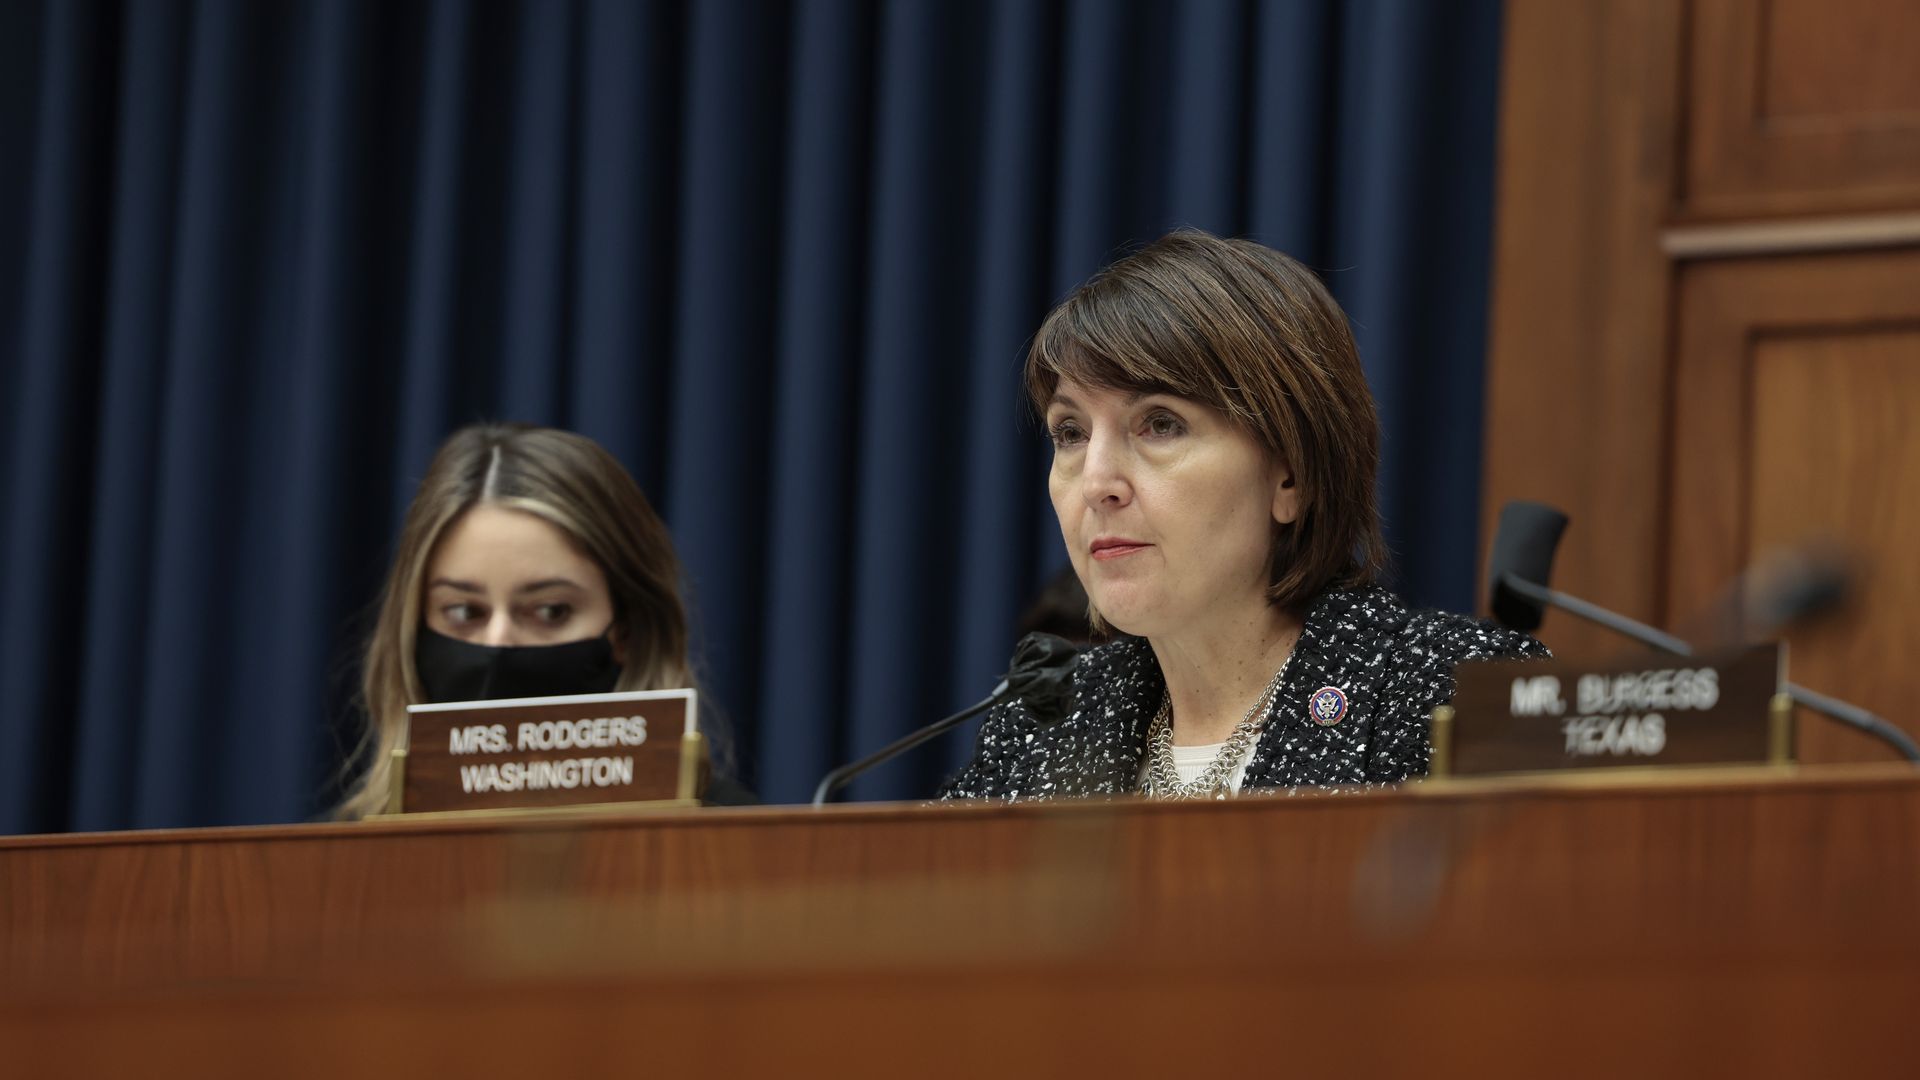 Cathy McMorris Rodgers sits and listens at a committee hearing